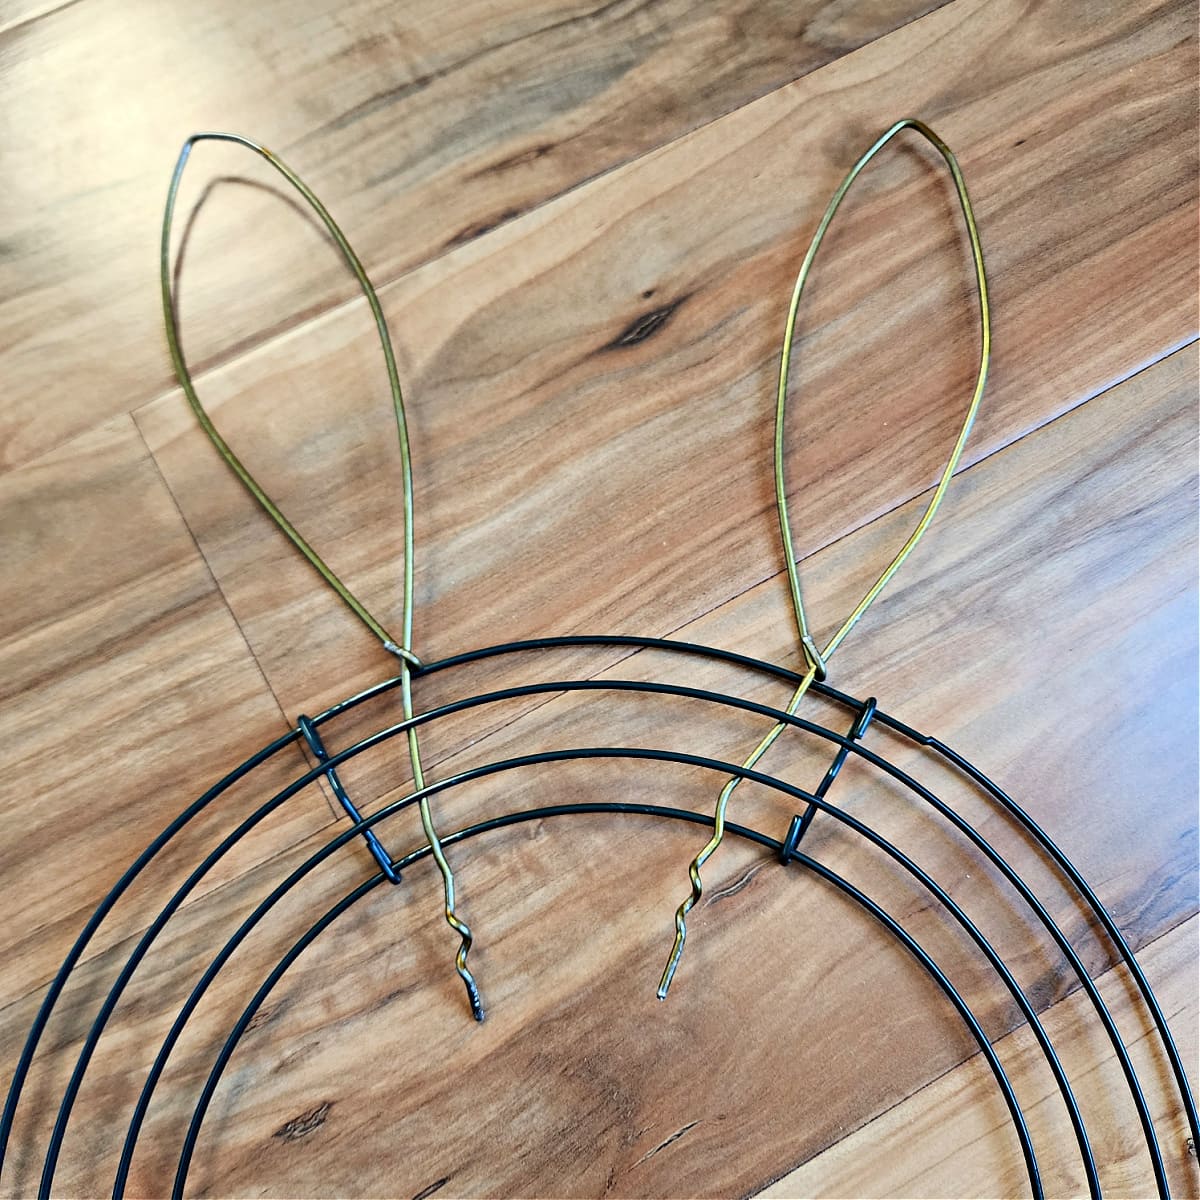 Two metal bunny ears inserted through round wire wreath form.